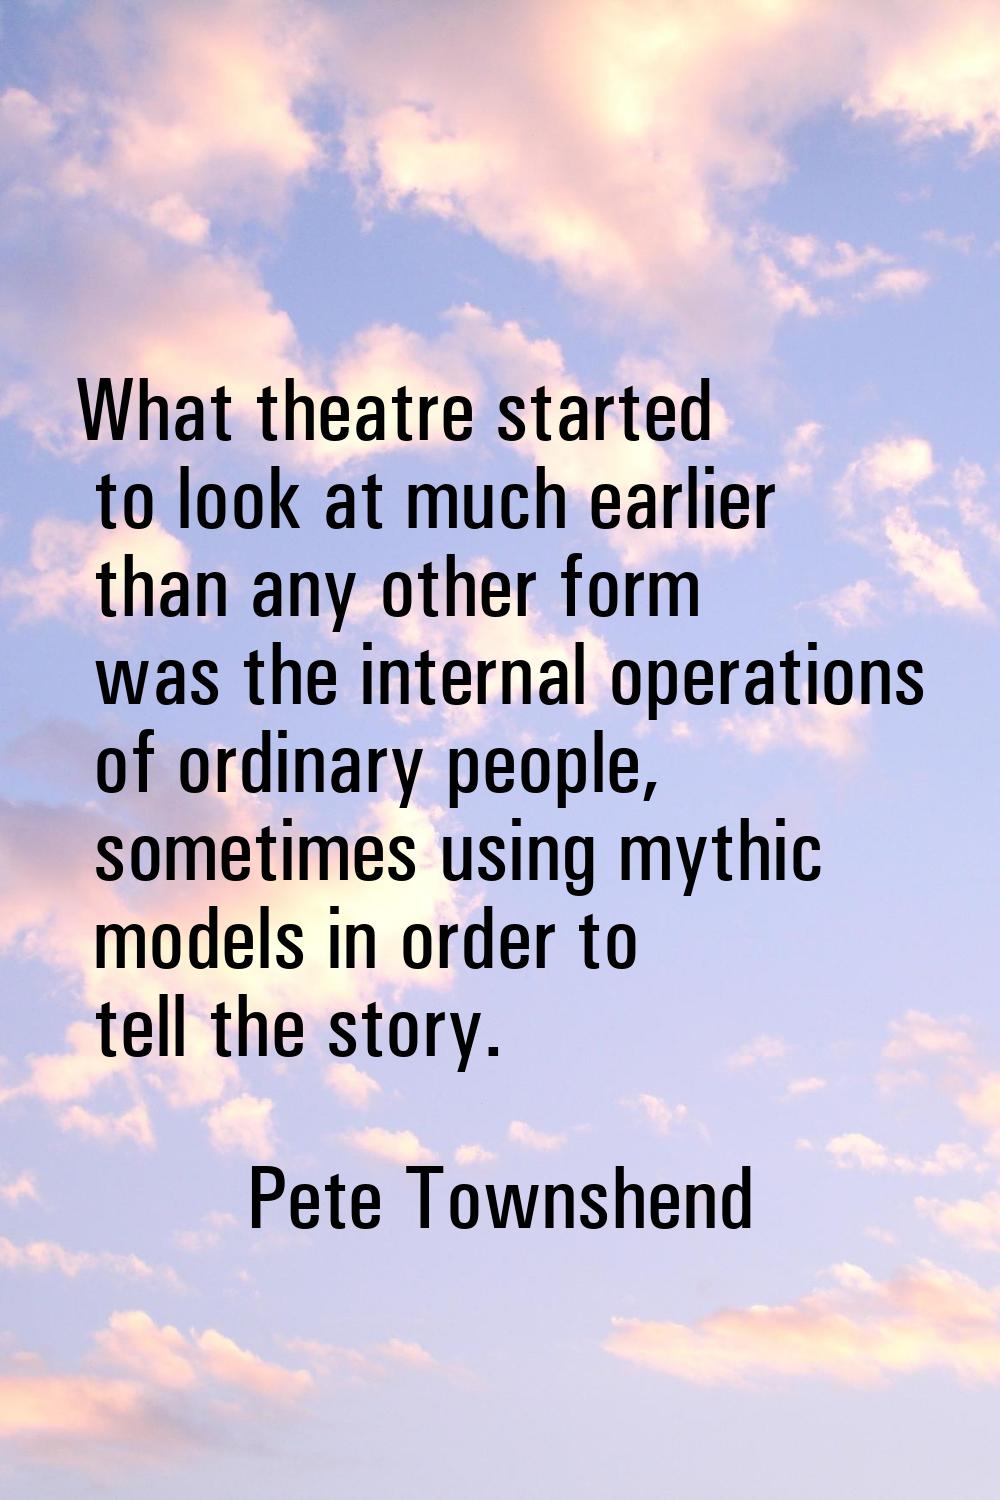 What theatre started to look at much earlier than any other form was the internal operations of ord